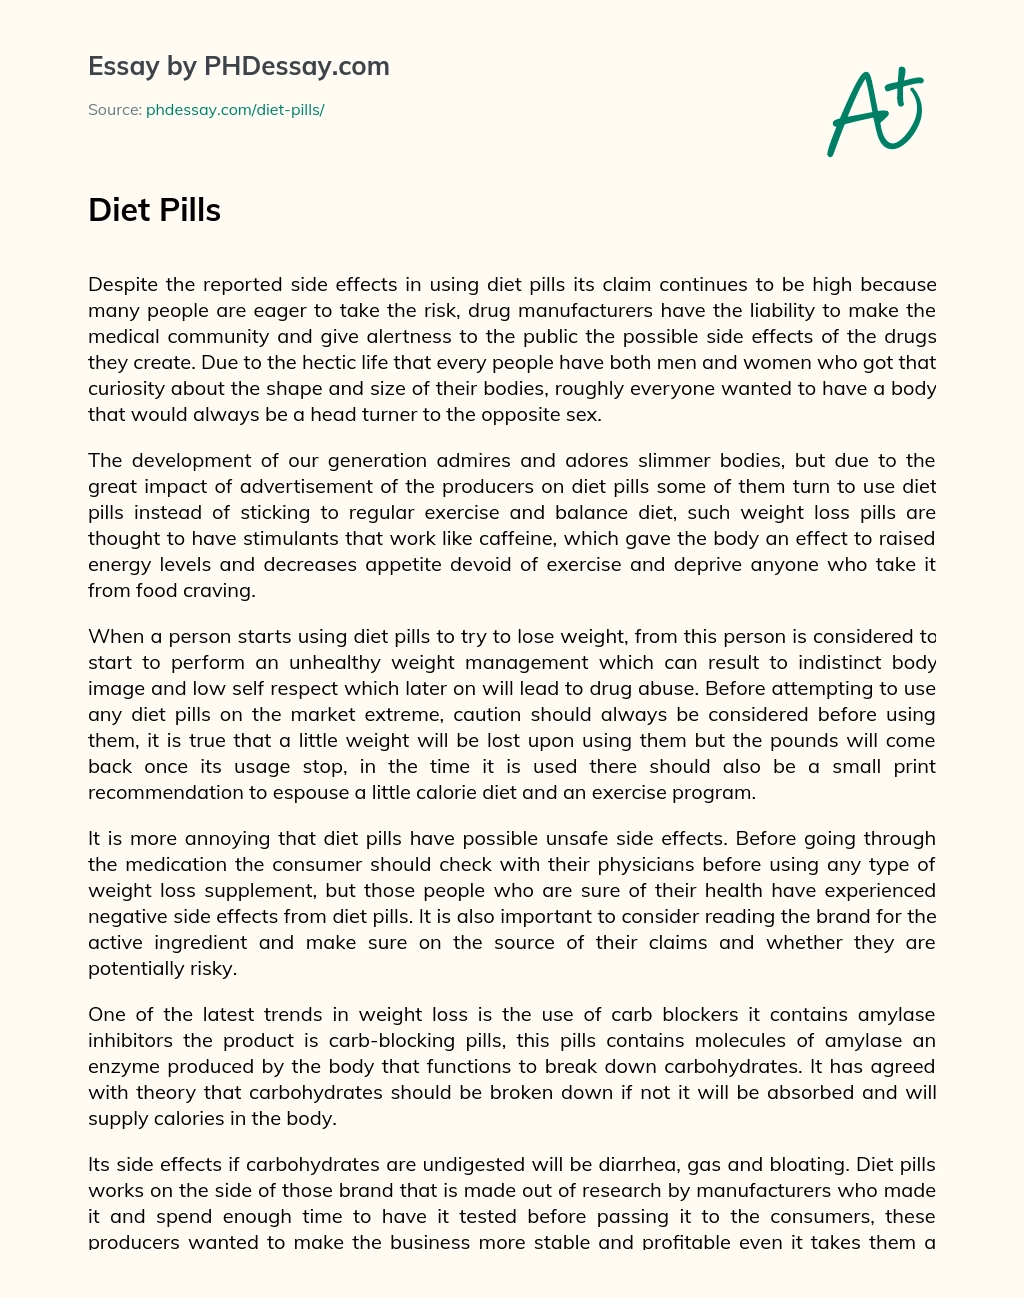 The Risky Appeal of Diet Pills: Manufacturers’ Liability and Public Awareness essay